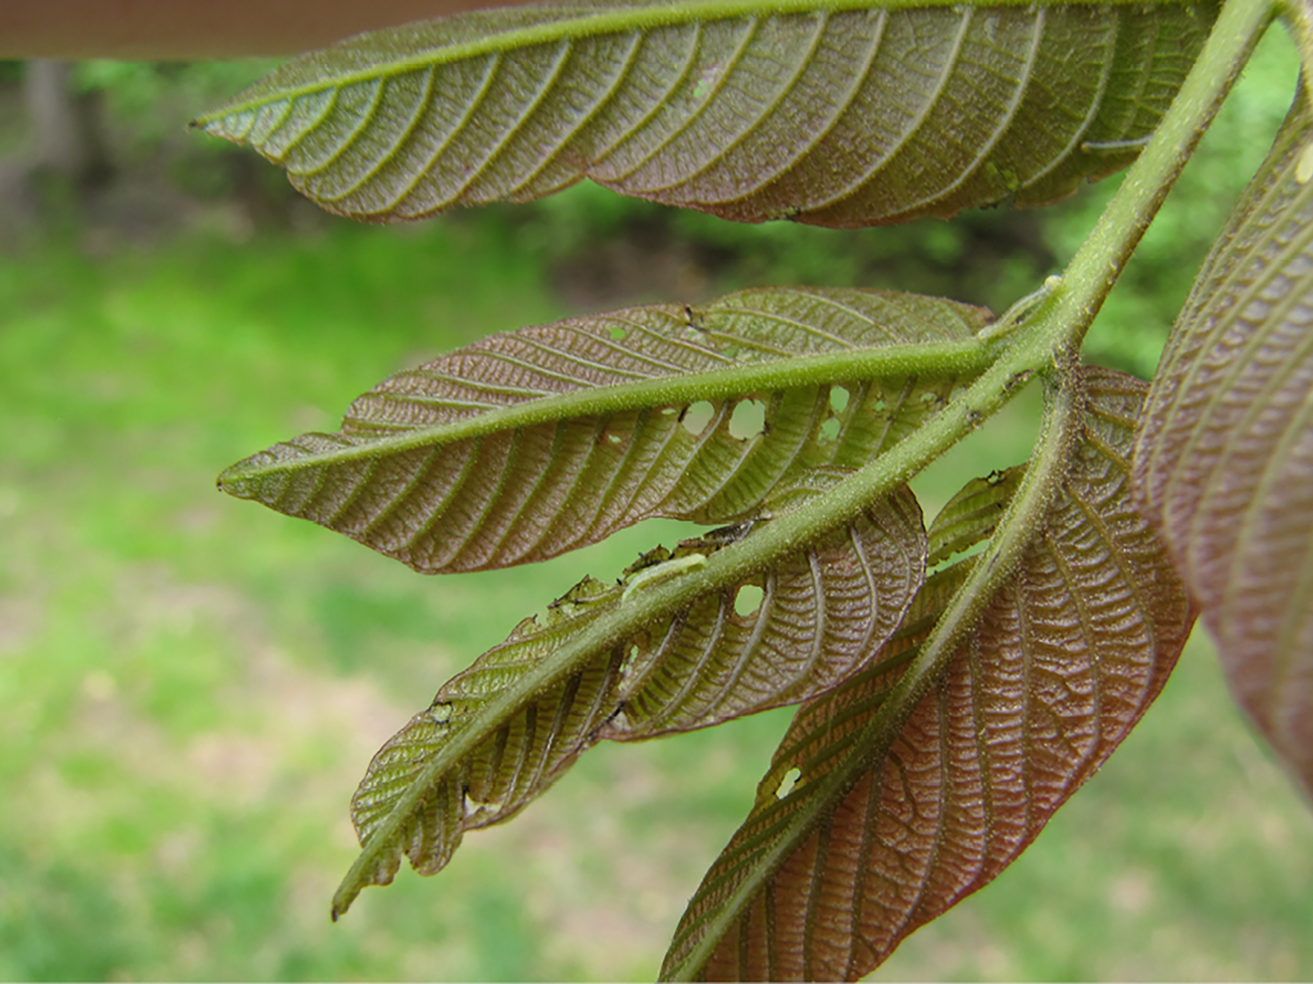 Fig. 8. Cankerworm damage in early spring. Note the small larvae feeding between the veins.